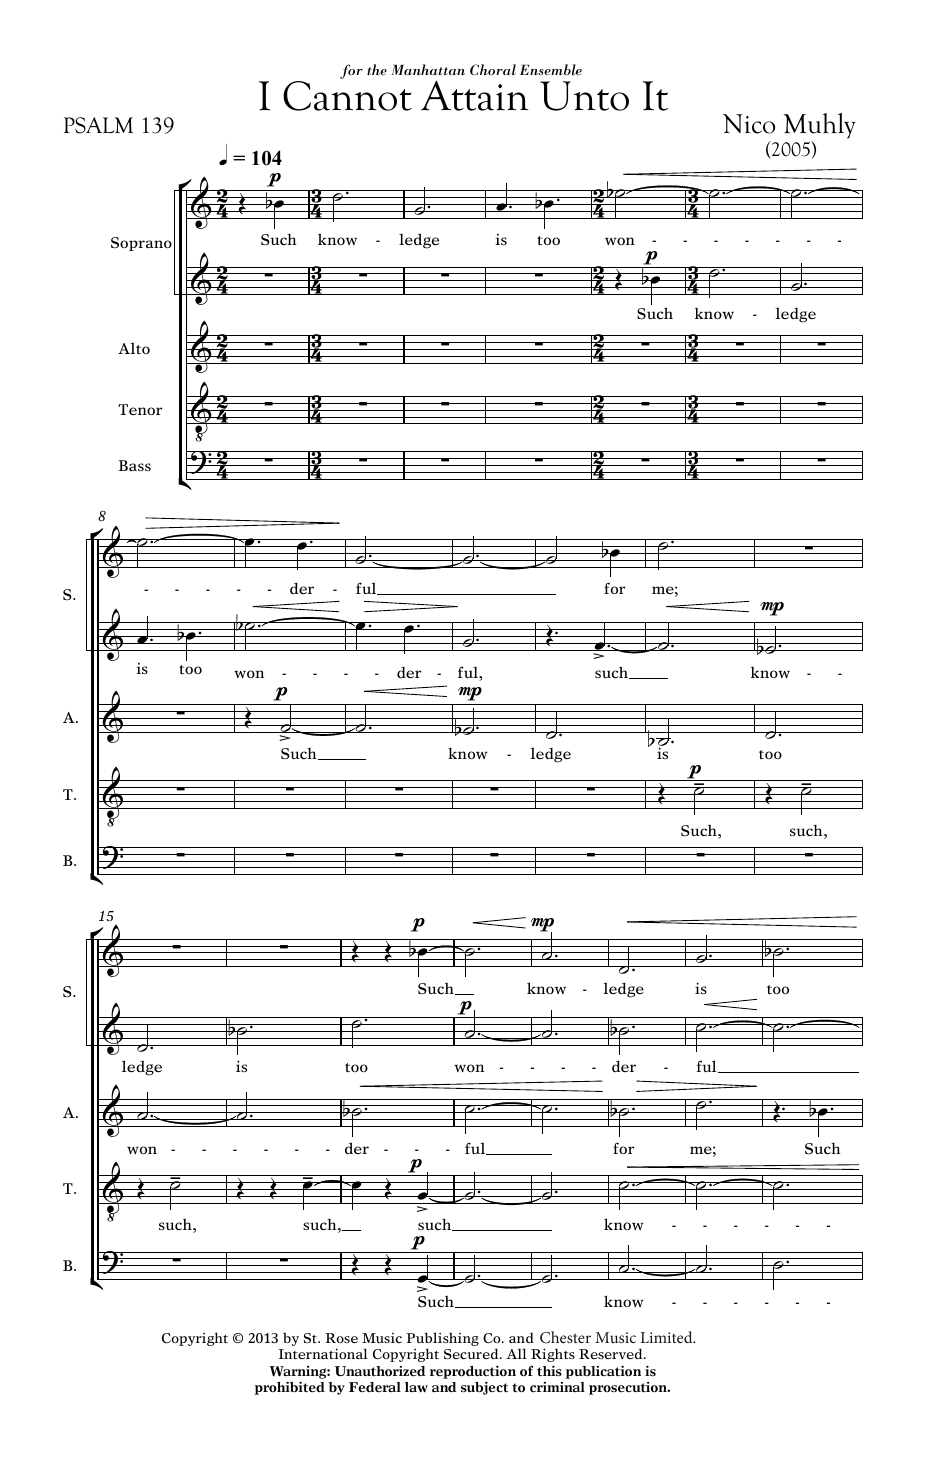 Download Nico Muhly I Cannot Attain Unto It Sheet Music